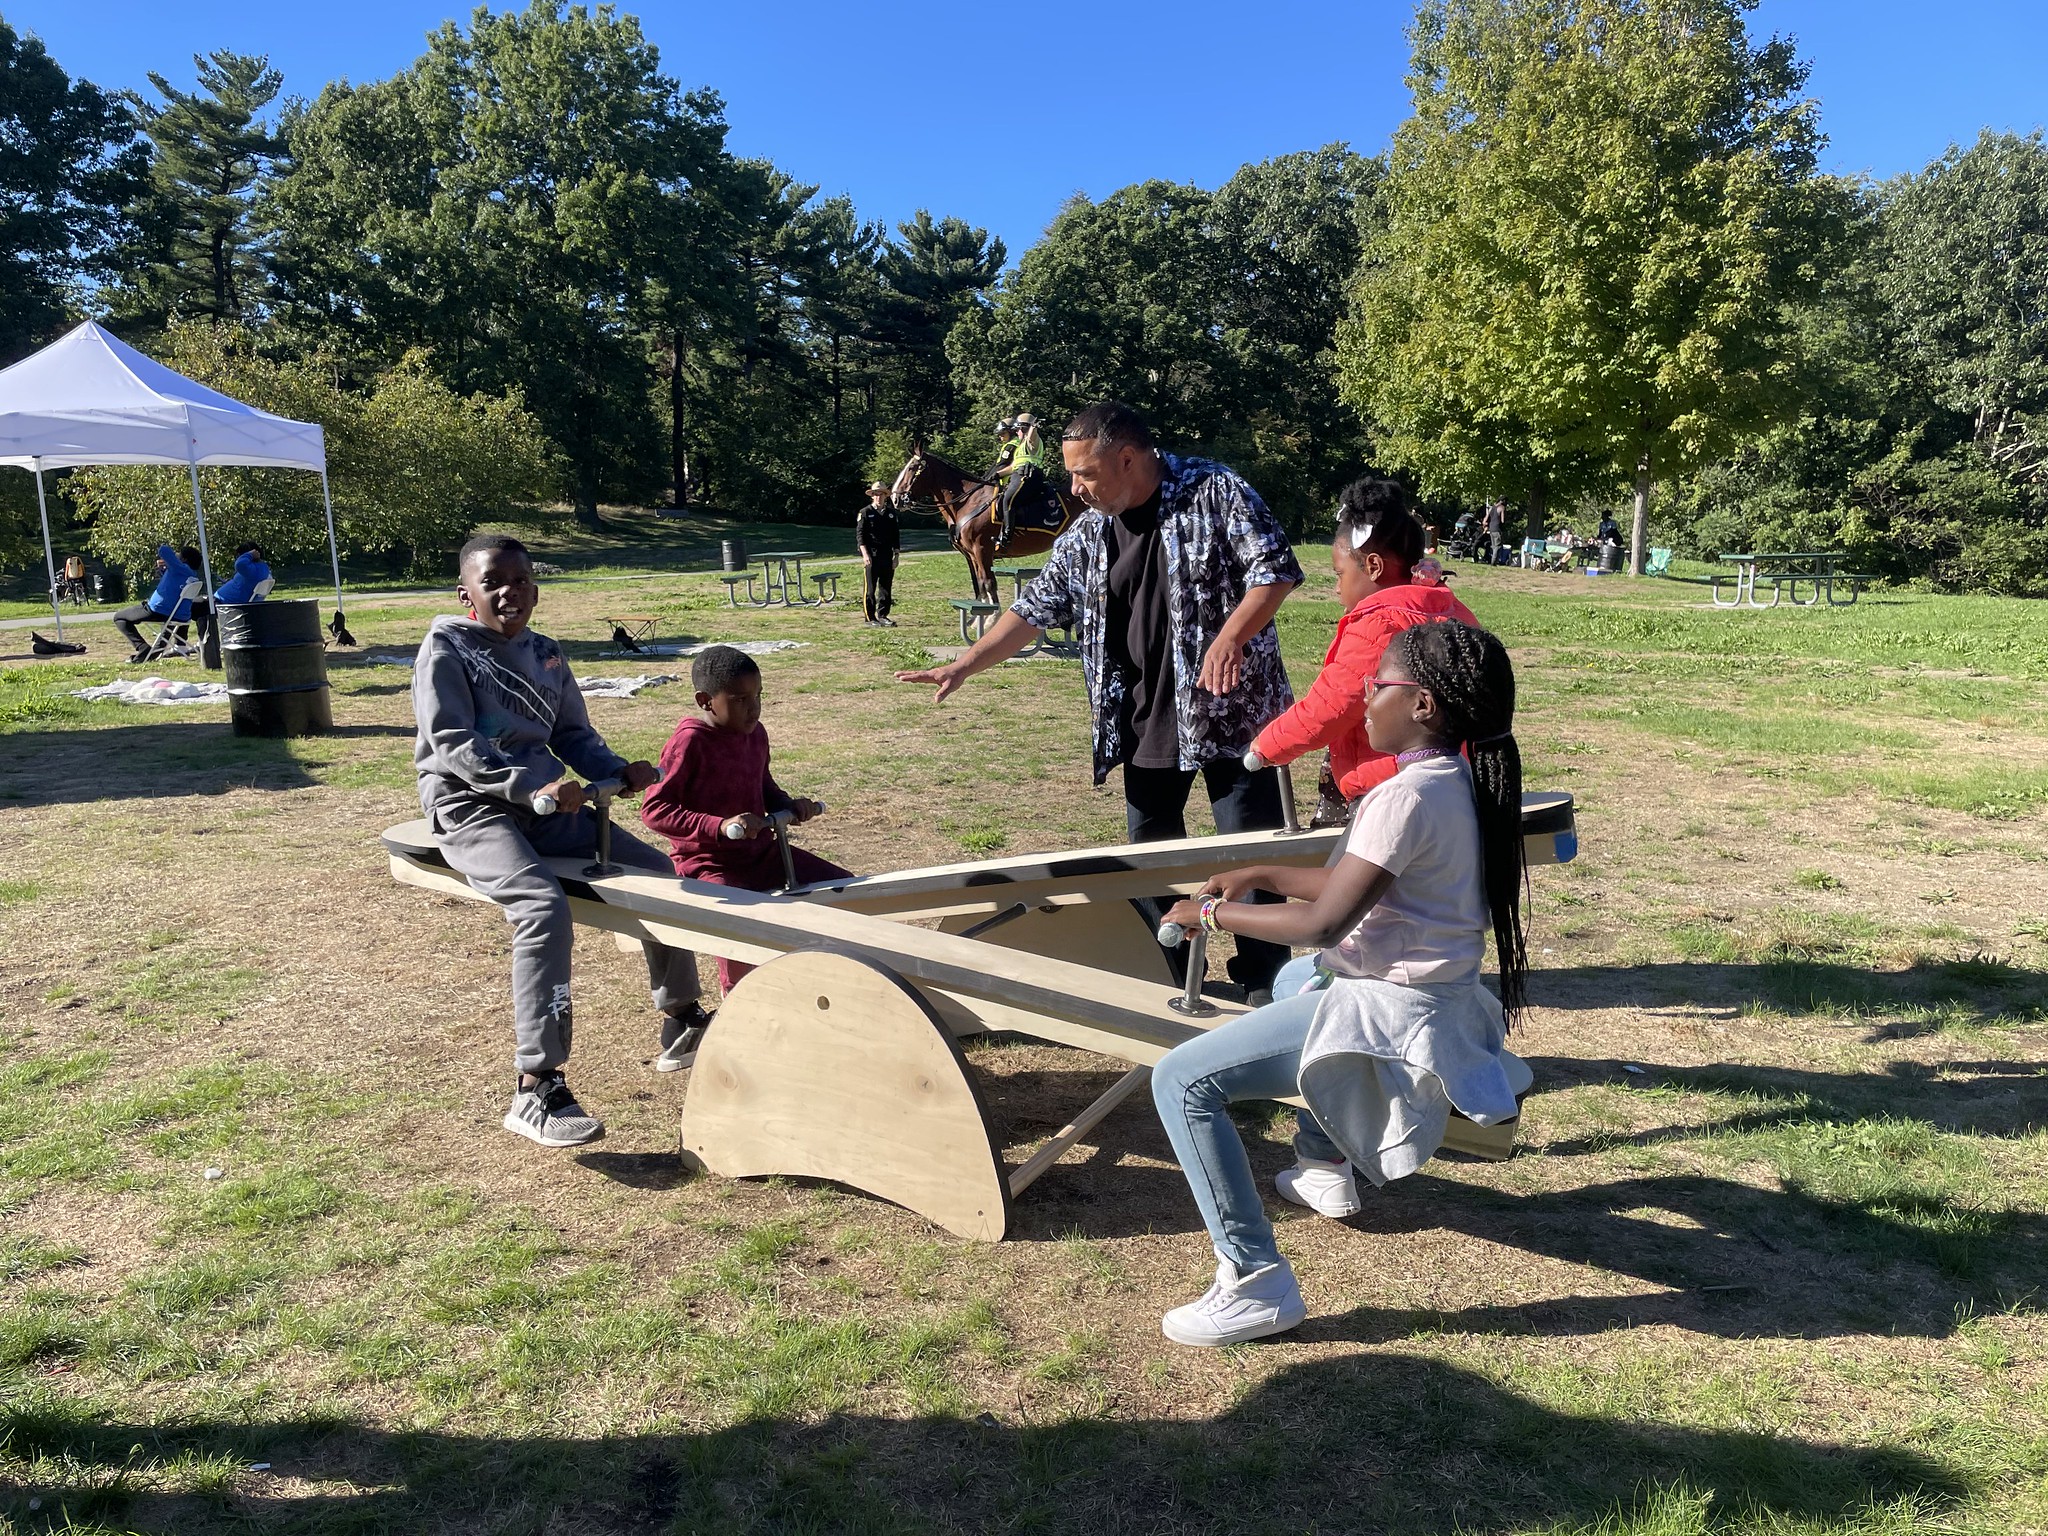 Kids playing on a see saw while an adult watches